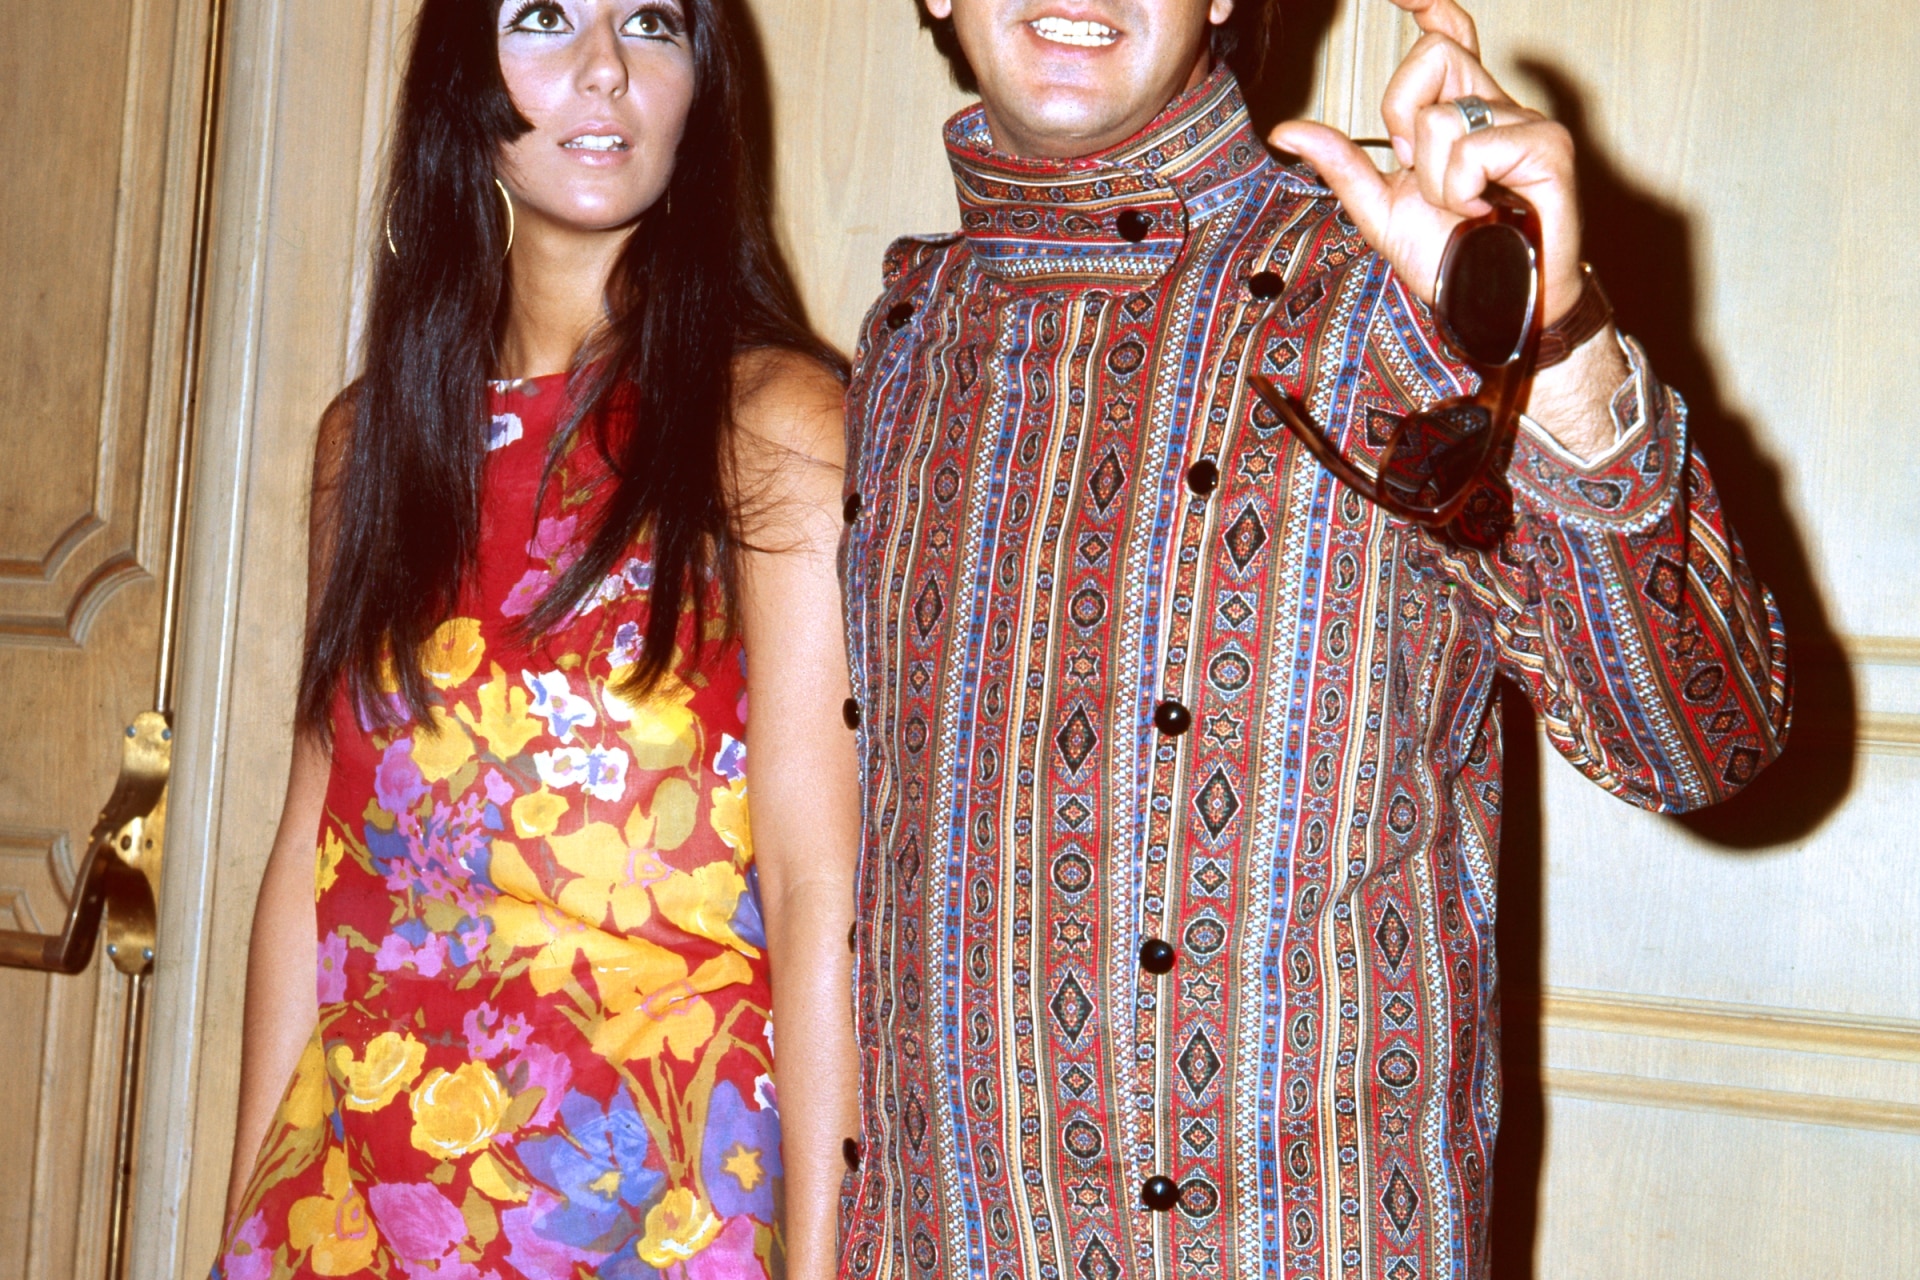 70s Fashion: 8 '70s Outfits That Prove the Decade Is Back